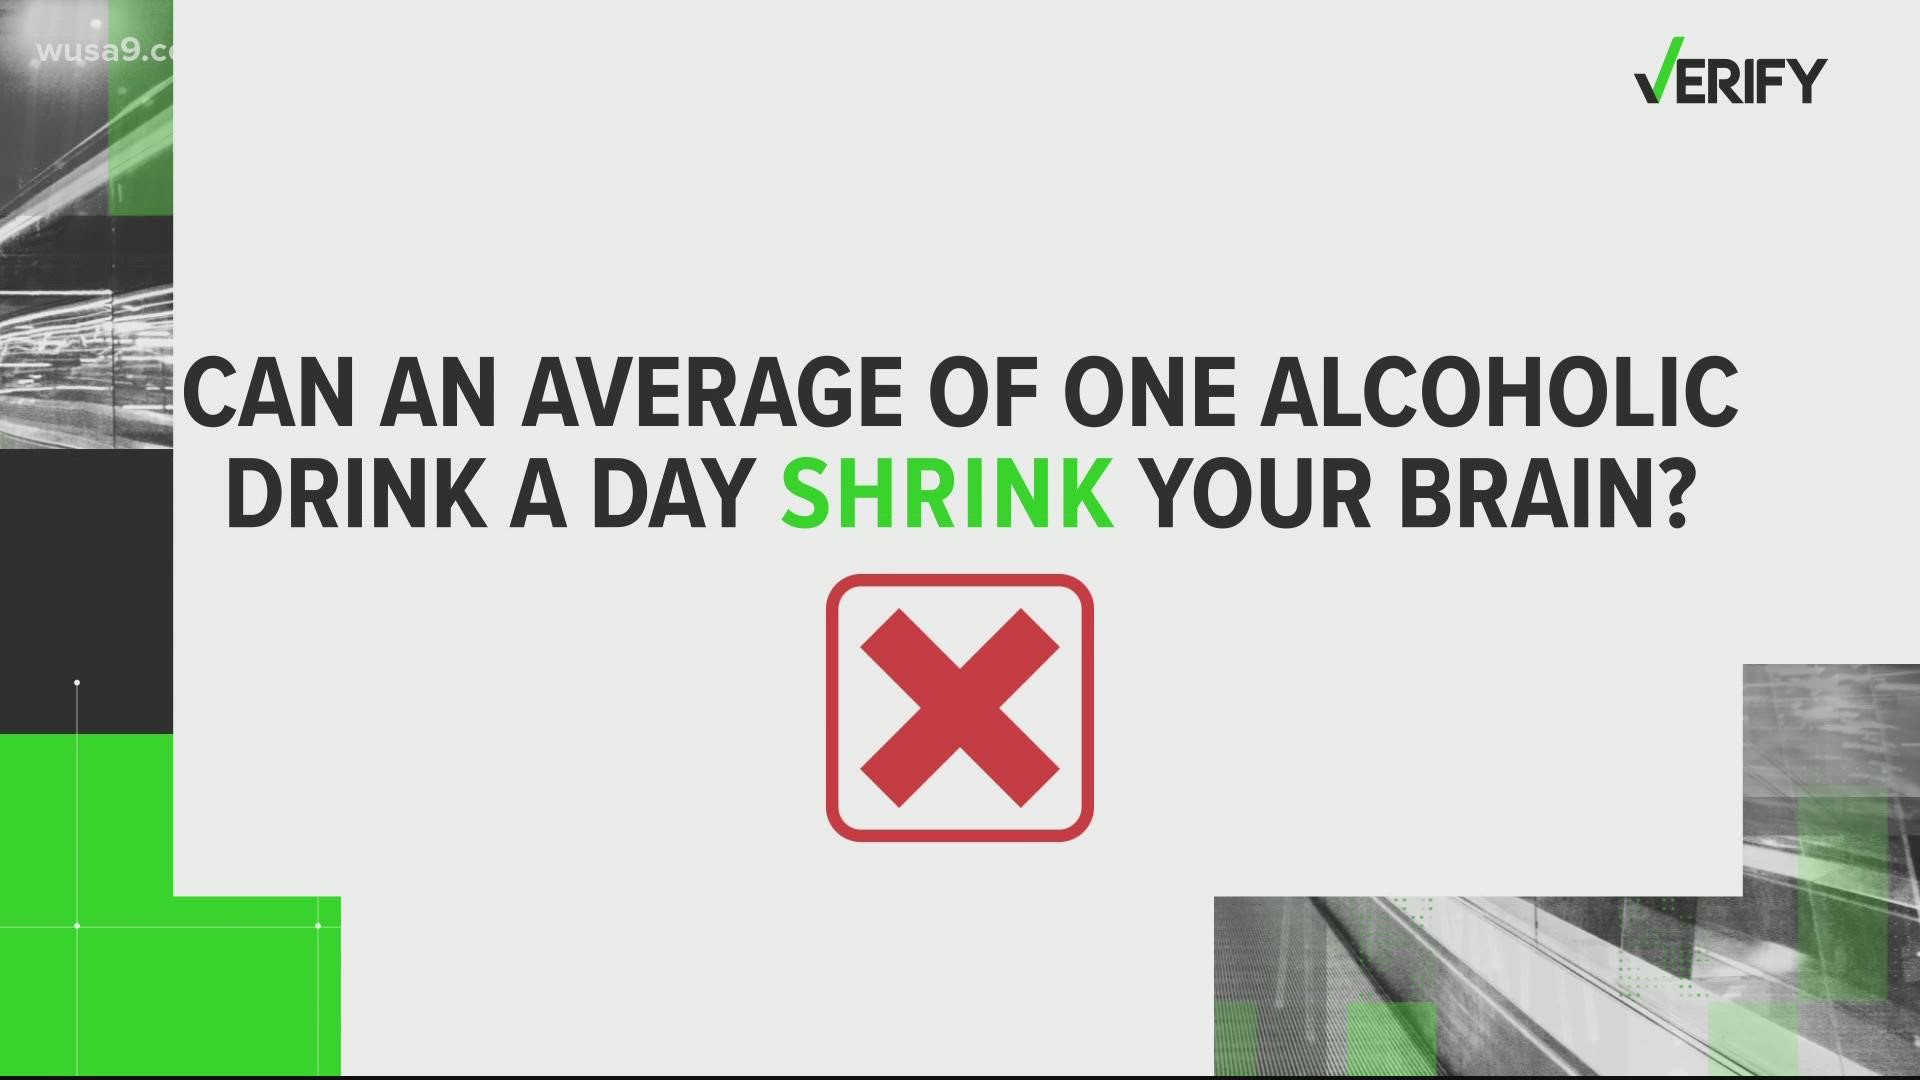 After studying thousands of brain scans, researchers say a viral TikTok video about alcohol and brain shrinkage is "sensationalist."